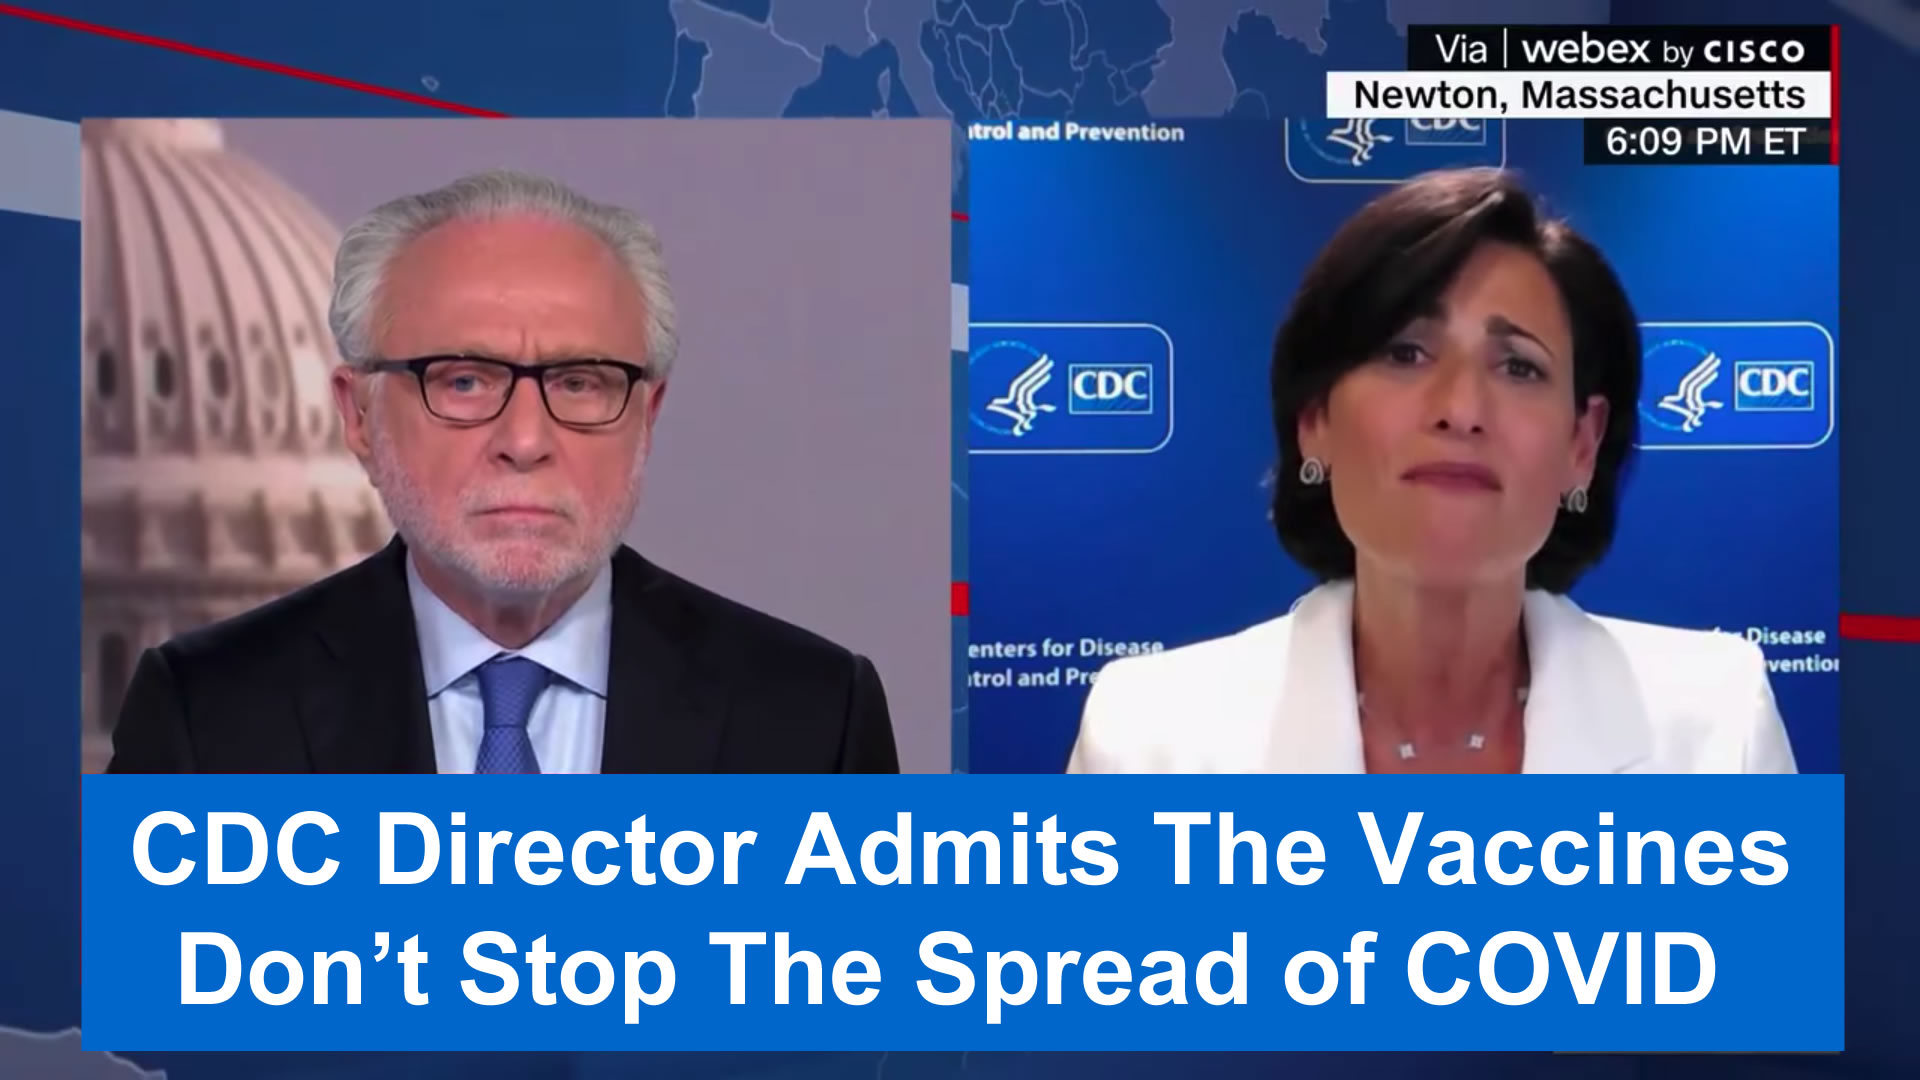 CDC Director Admits COVID Vaccines Do Not Stop The Spread of COVID